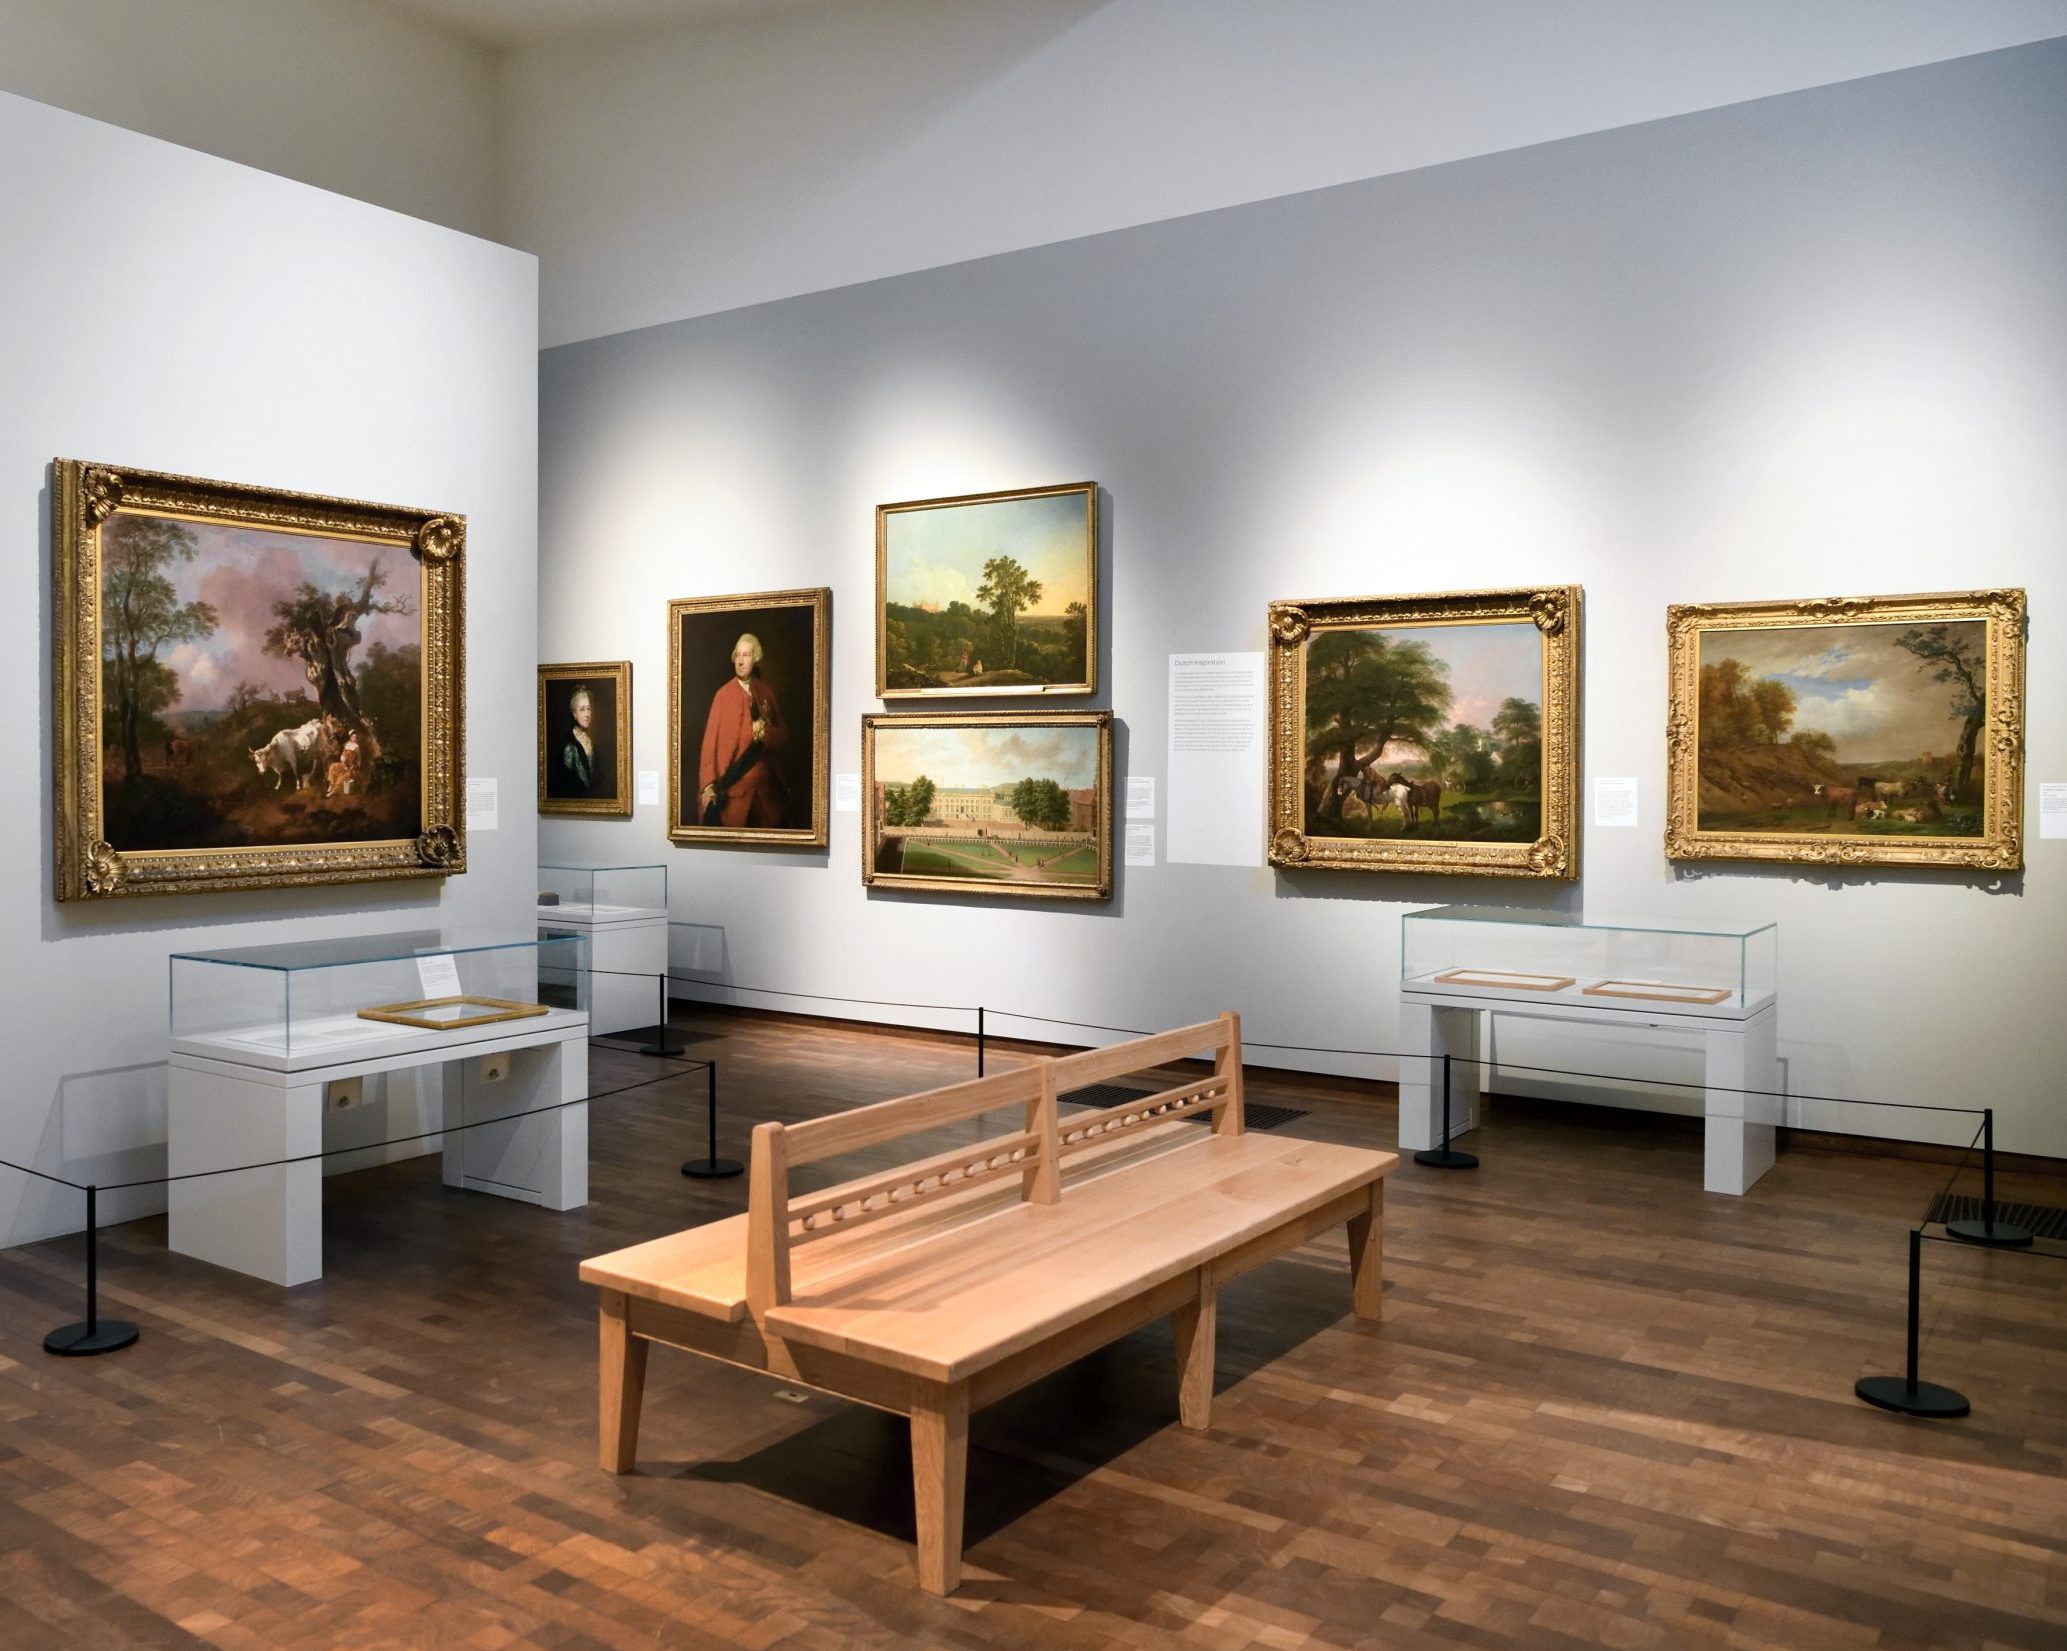 An image taken within the Timothy & Mary Clode Gallery of the Woburn exhibition.It shows a series of masterpieces on the wall and artefact cabinets, as well as a Suffolk style bench in the centre.